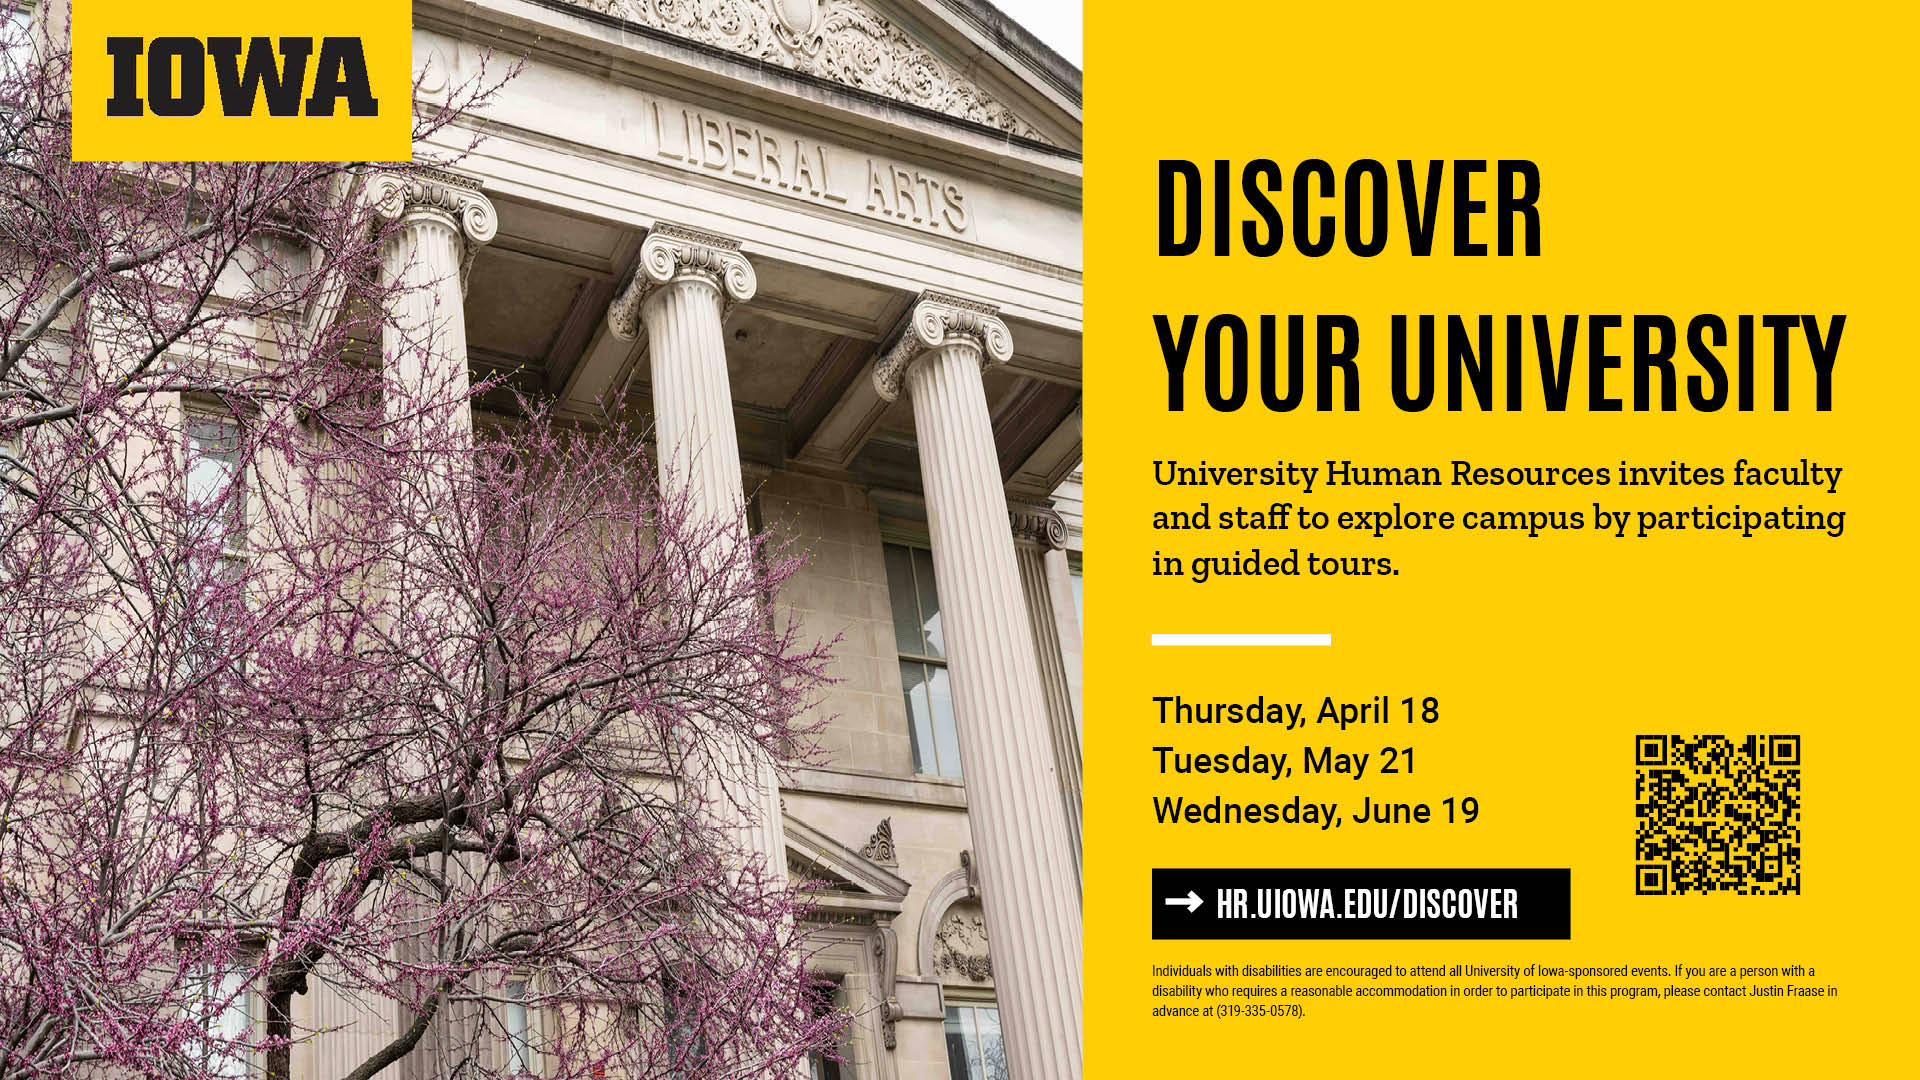 Discover Your University: University Human Resources invites faculty and staff to explore campus by participating in guided tours on Thursday, April 18; Tuesday, May 21; and Wednesday, June 19. Go to hr.uiowa.edu/discover